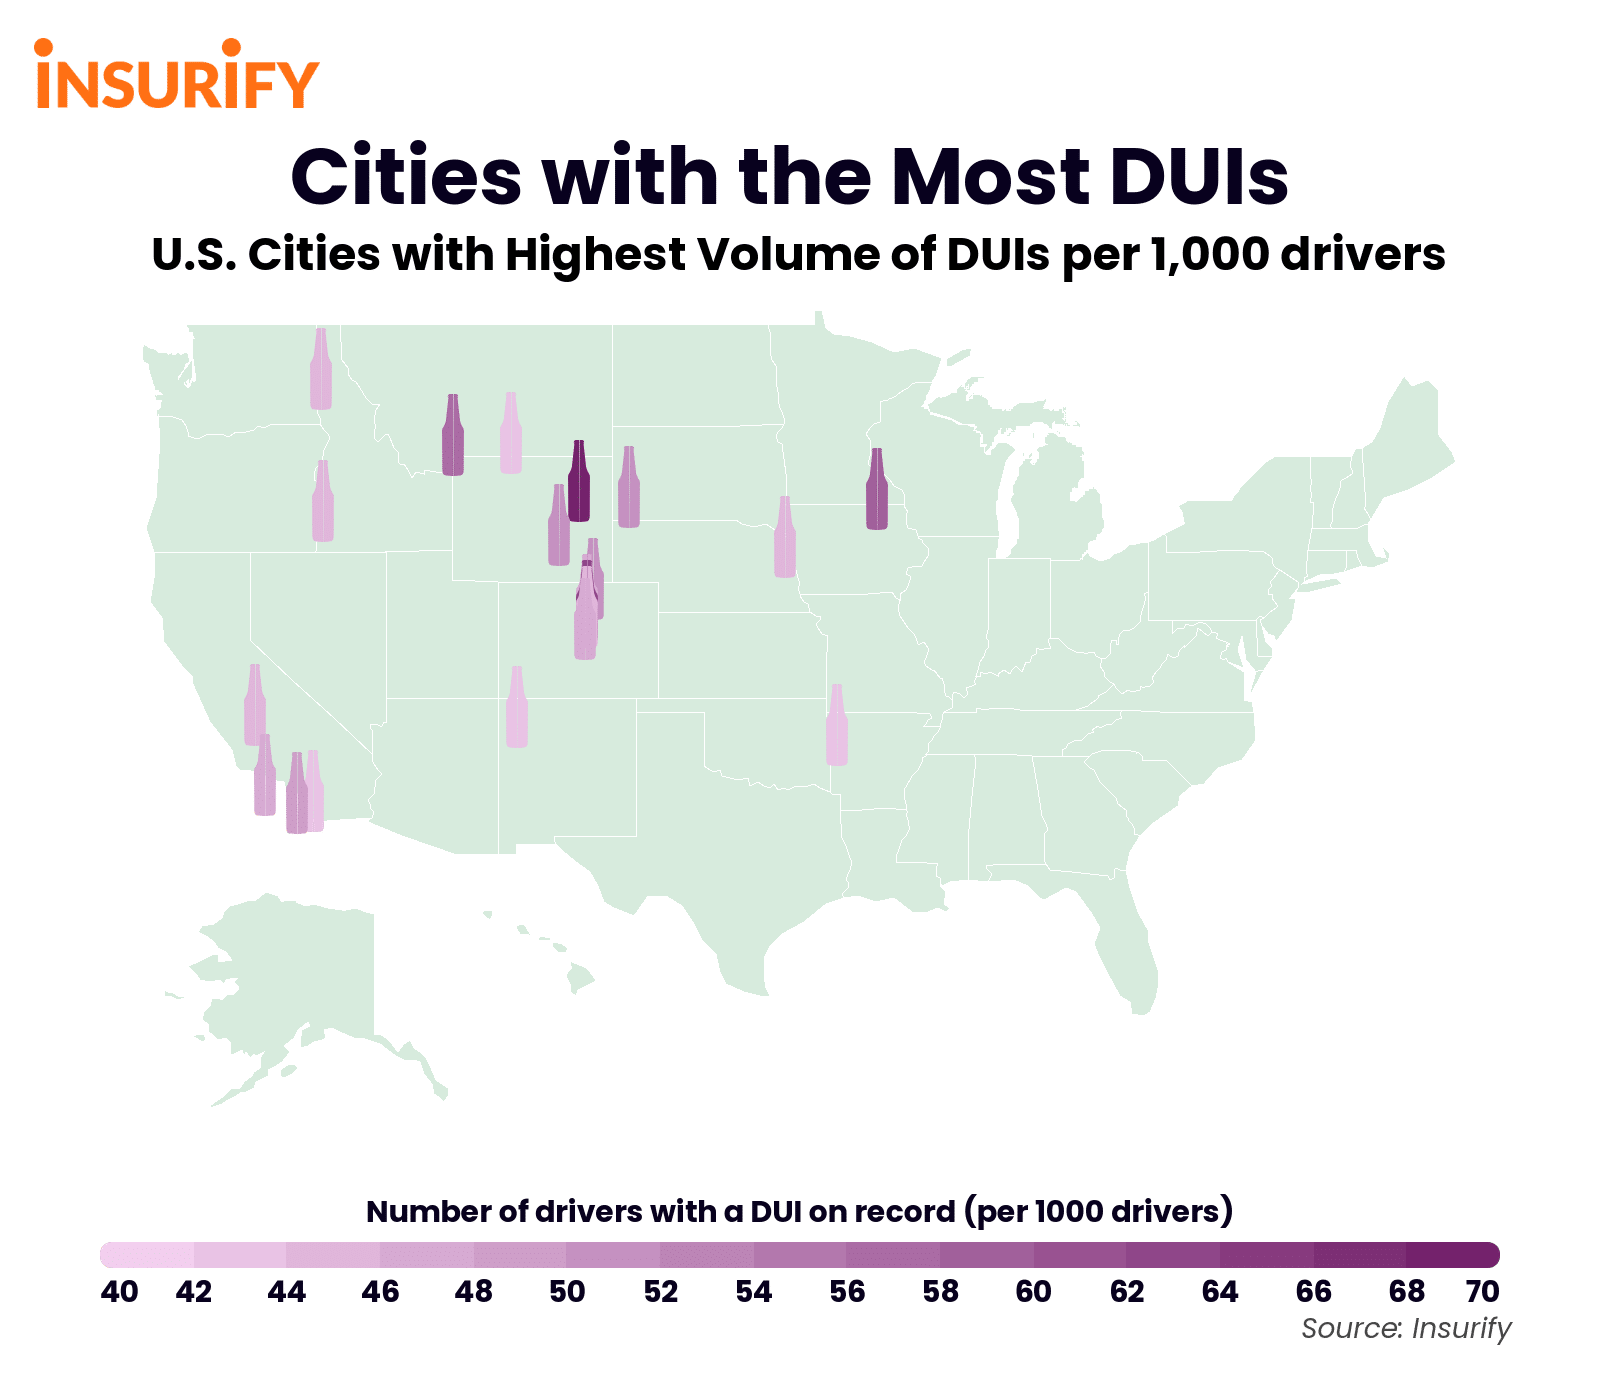 Cities with the most DUIs